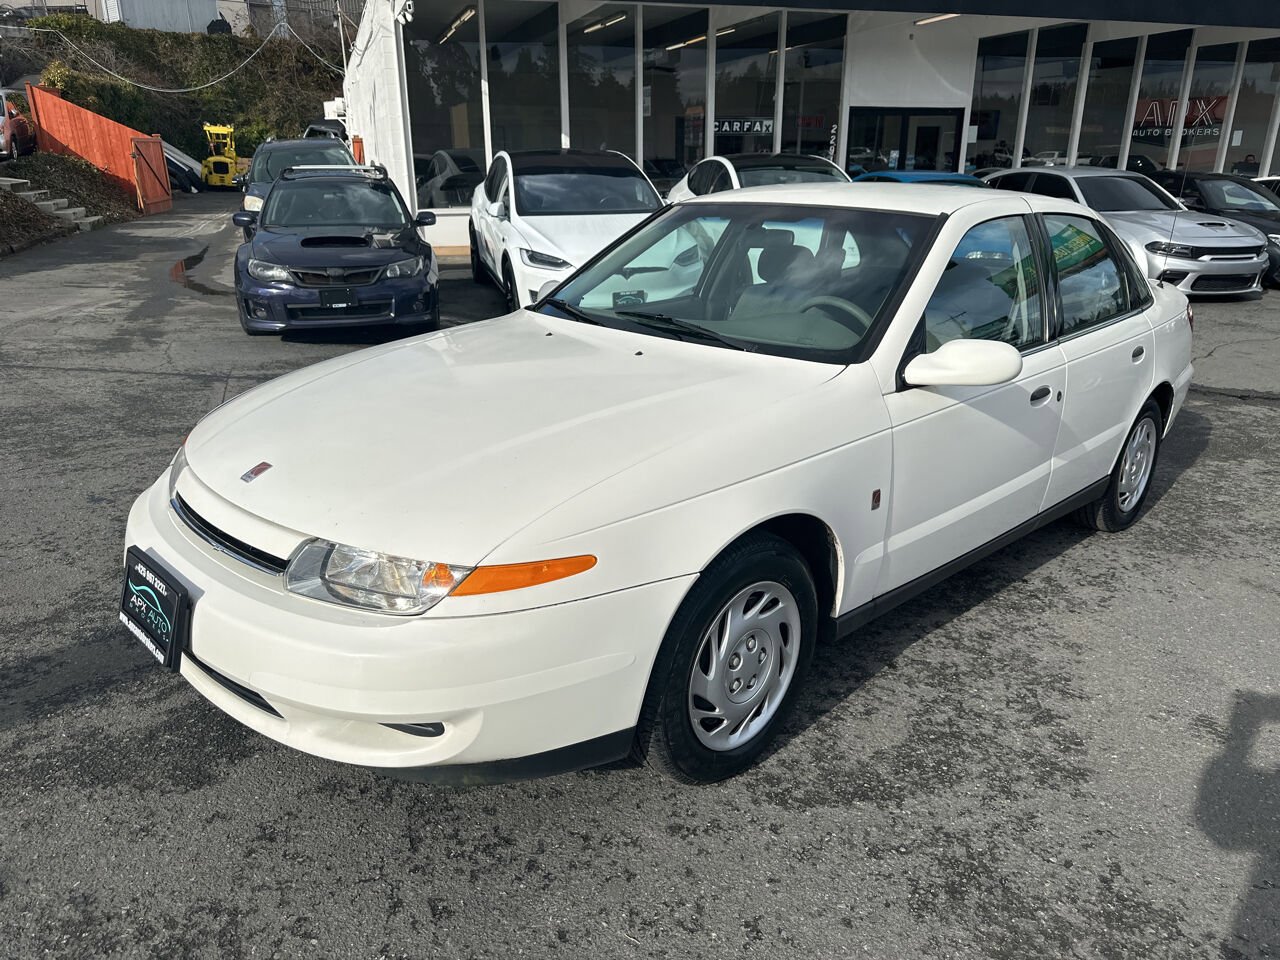 Used 2001 Saturn L-Series for Sale Right Now - Autotrader